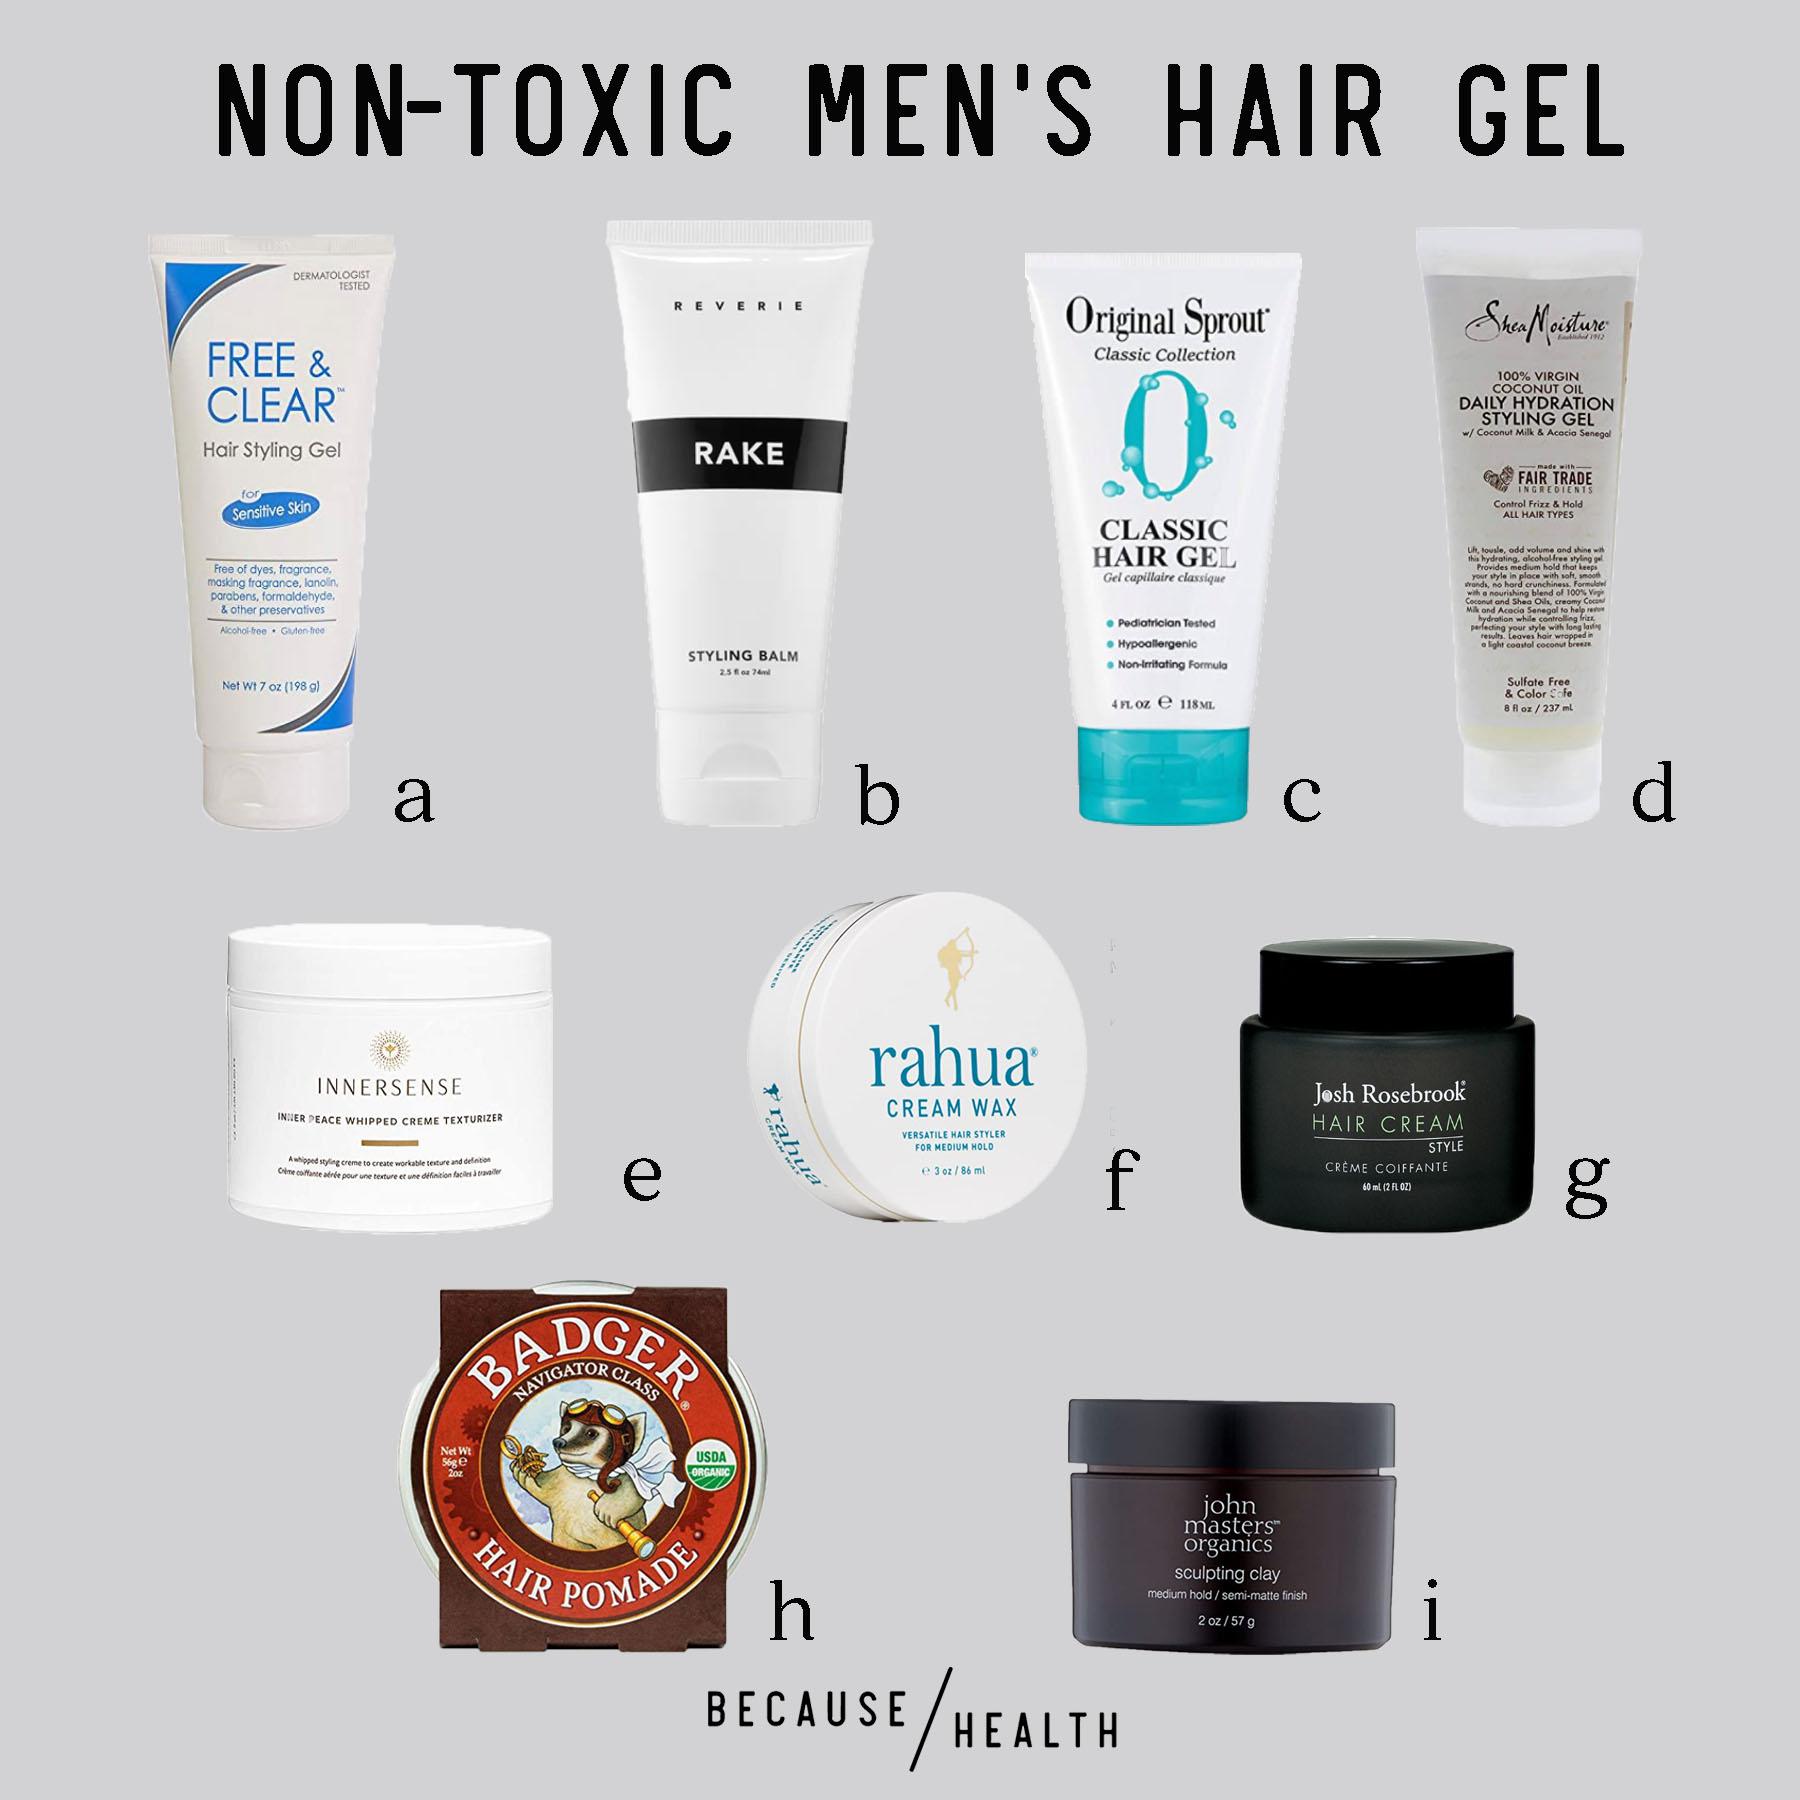 Non-Toxic Hair Gel for Men - Because Health